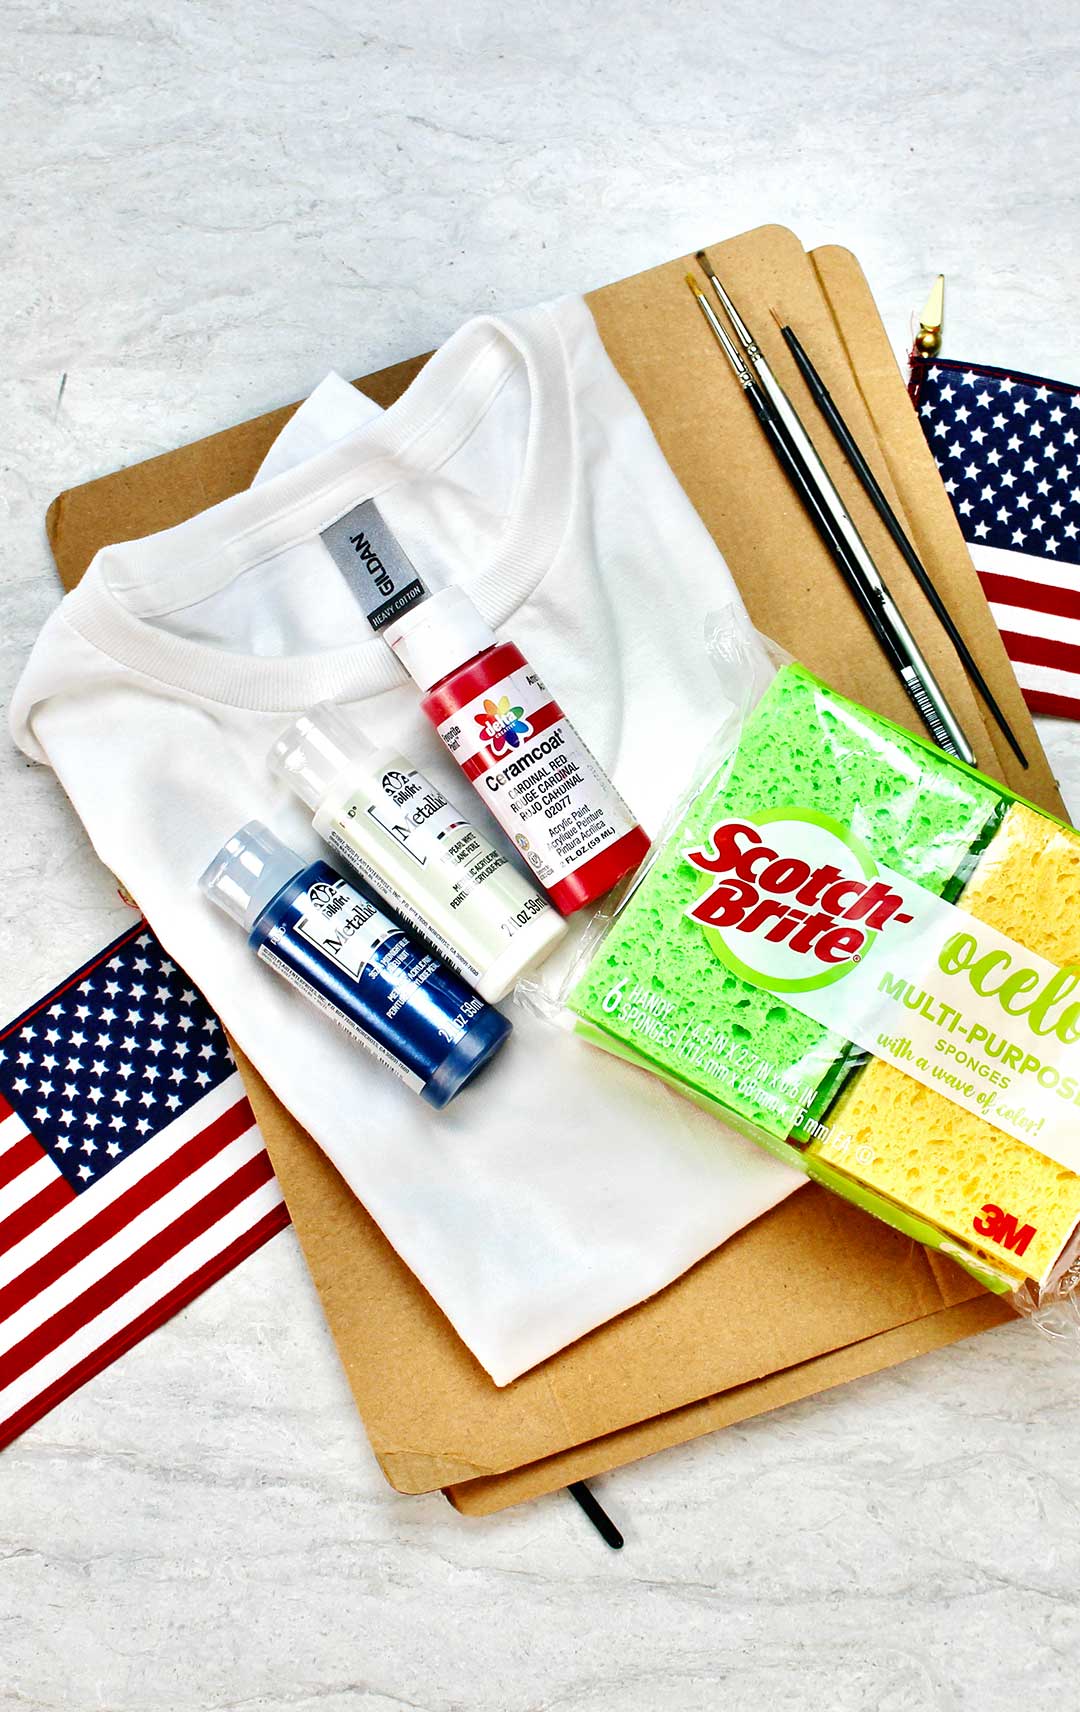 Supplies for 4th of July shirts. Green and yellow sponges, cardboard, paintbrushes, acrylic paints and a white t-shirt.